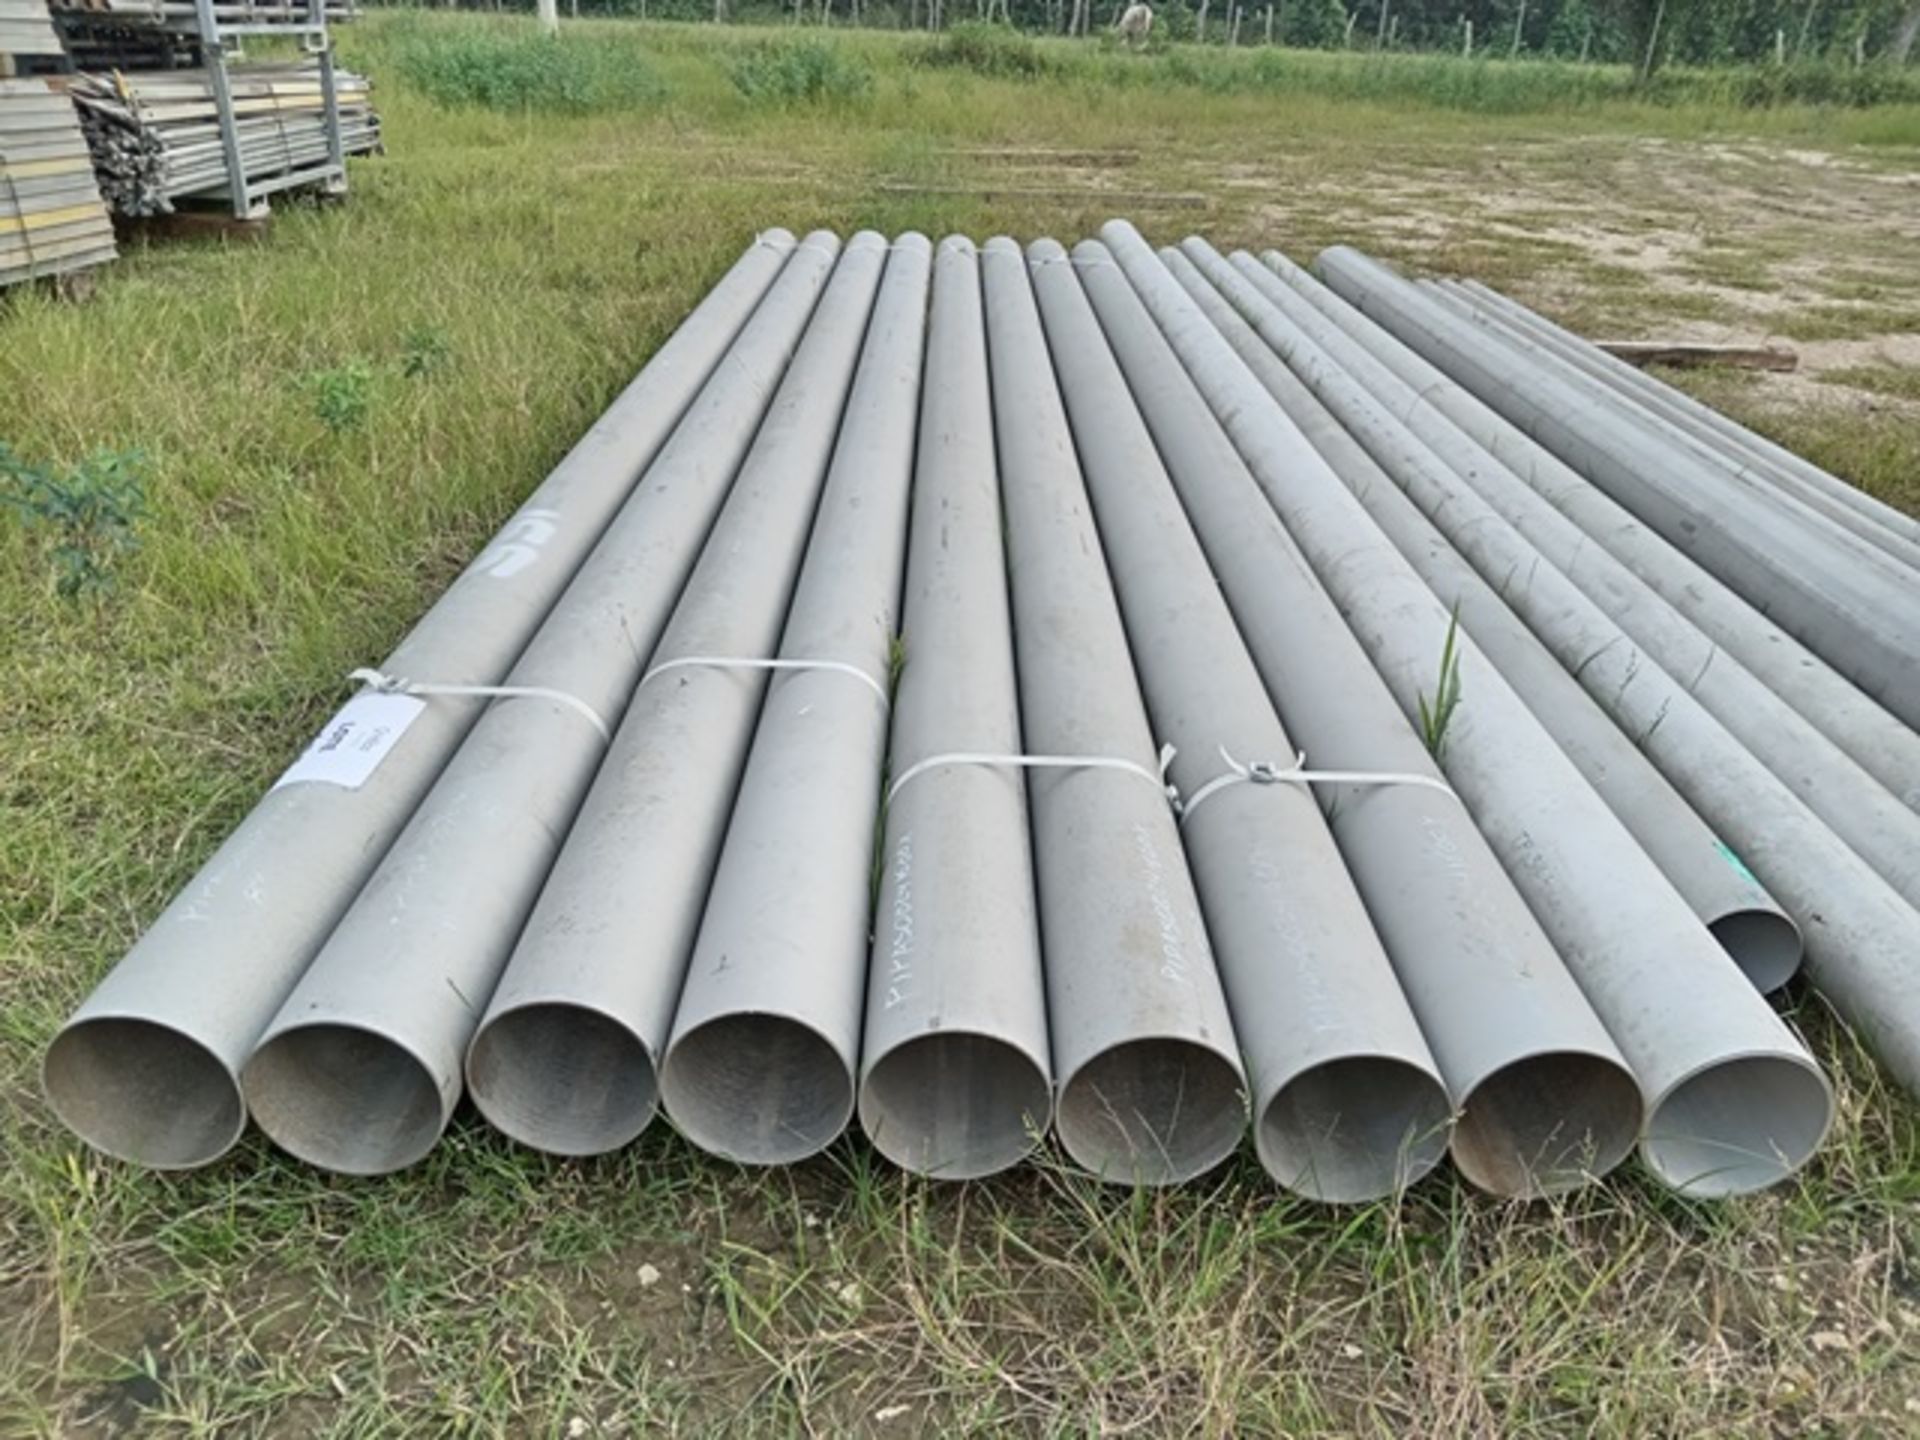 LOT OF T-316 STAINLESS STEEL PIPE - Image 6 of 7